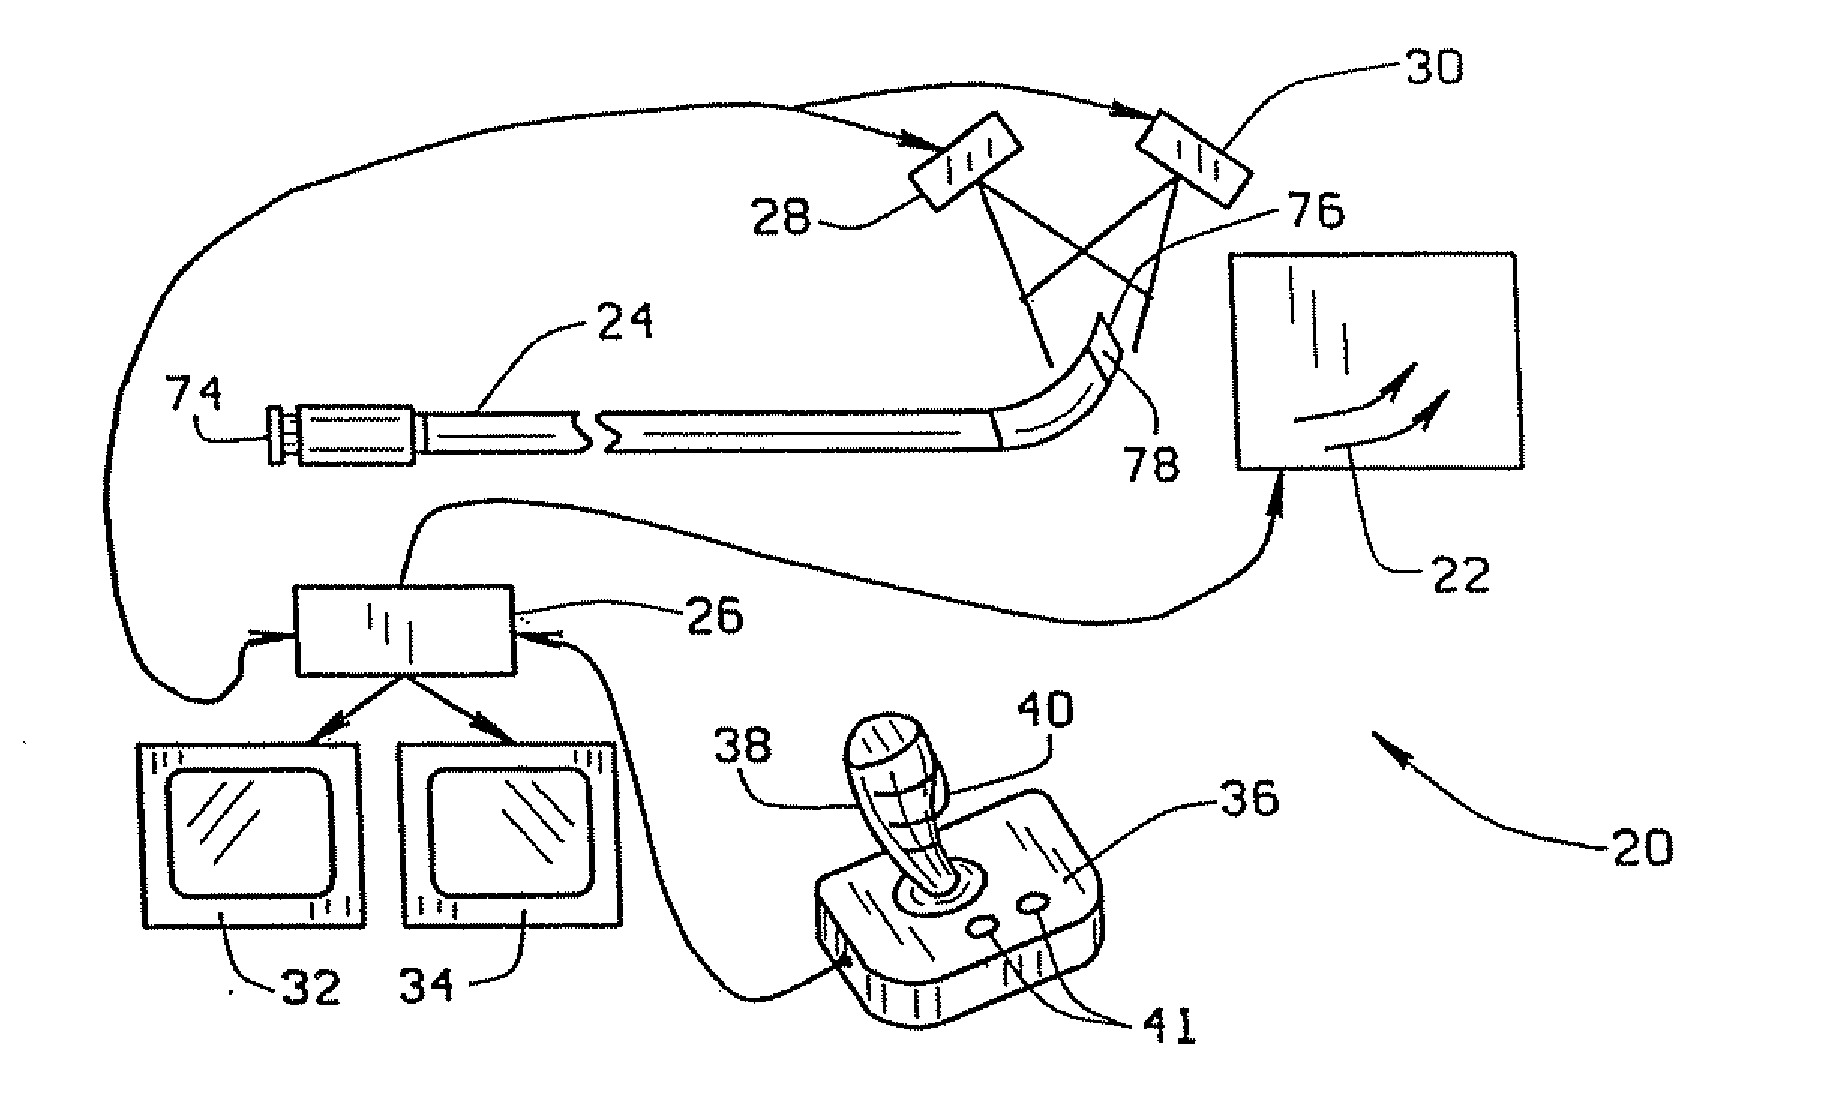 Method and apparatus for magnetically controlling catheters in body lumens and cavities